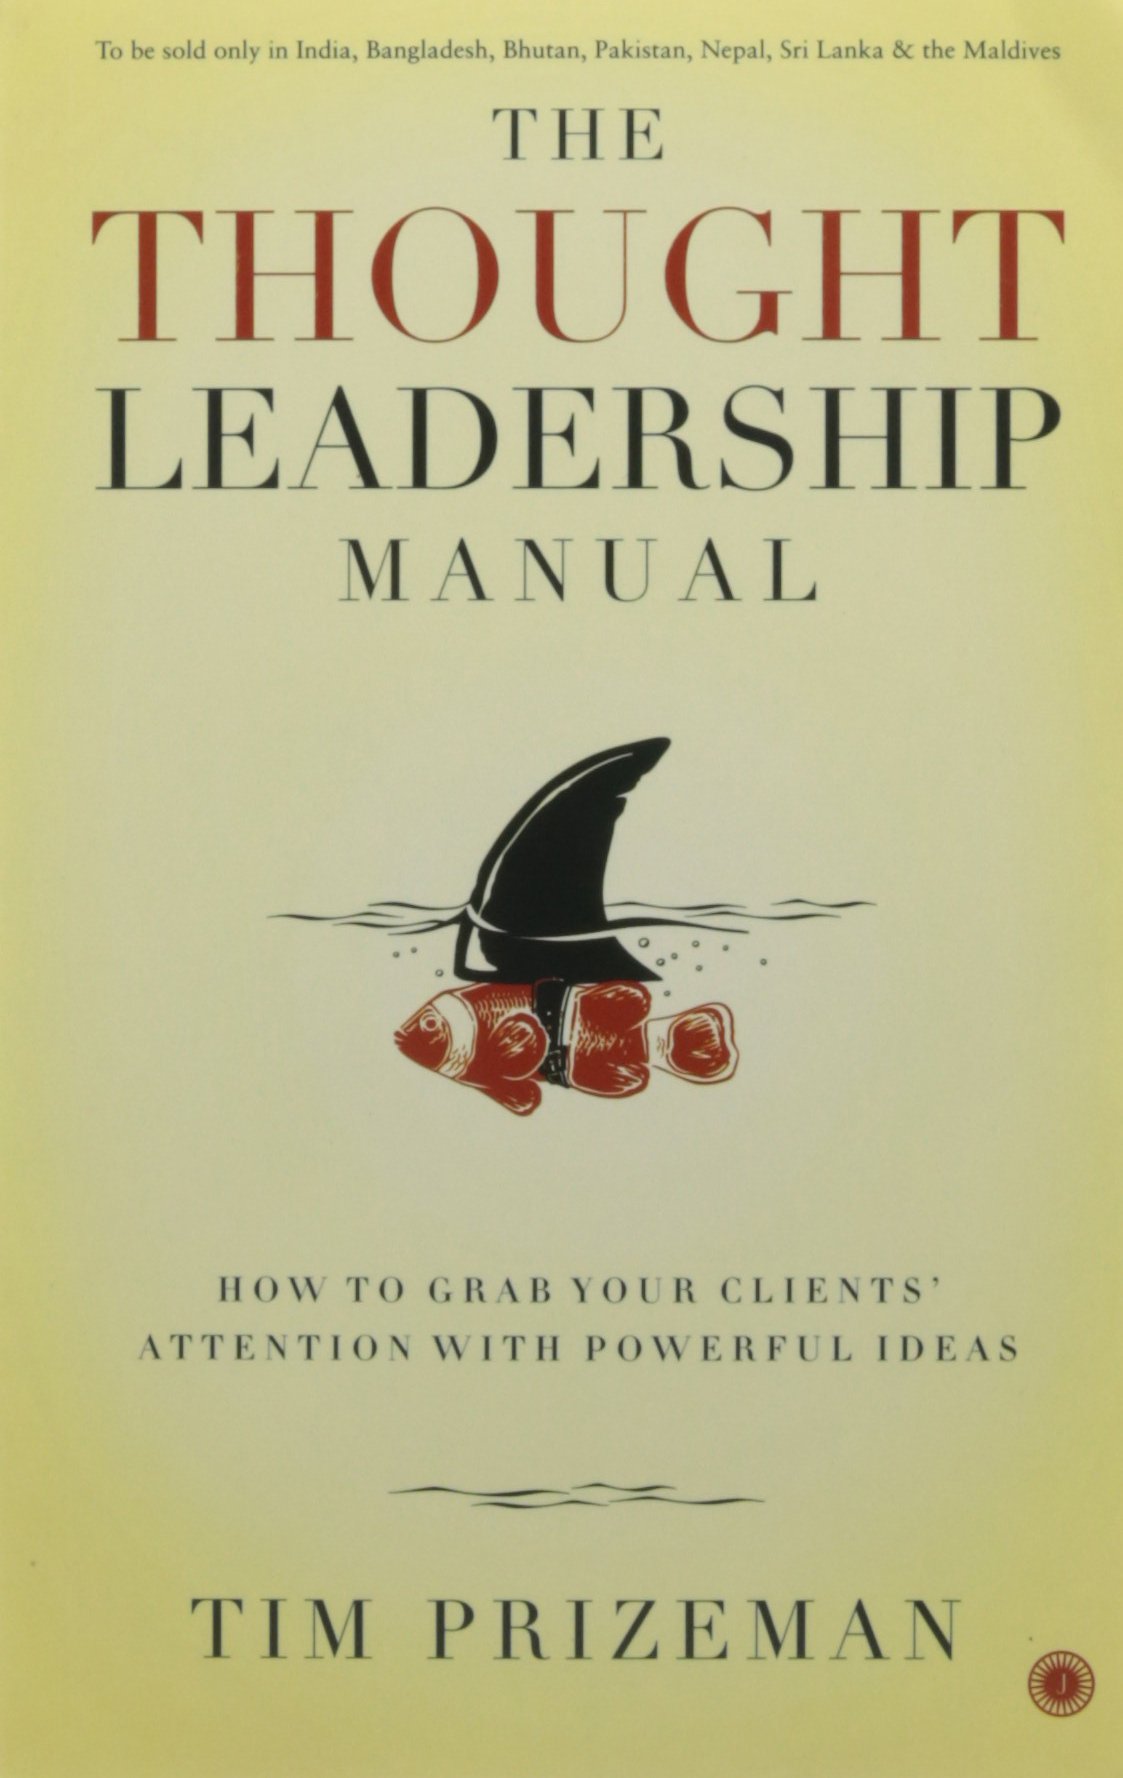 The Thought Leadership Manual